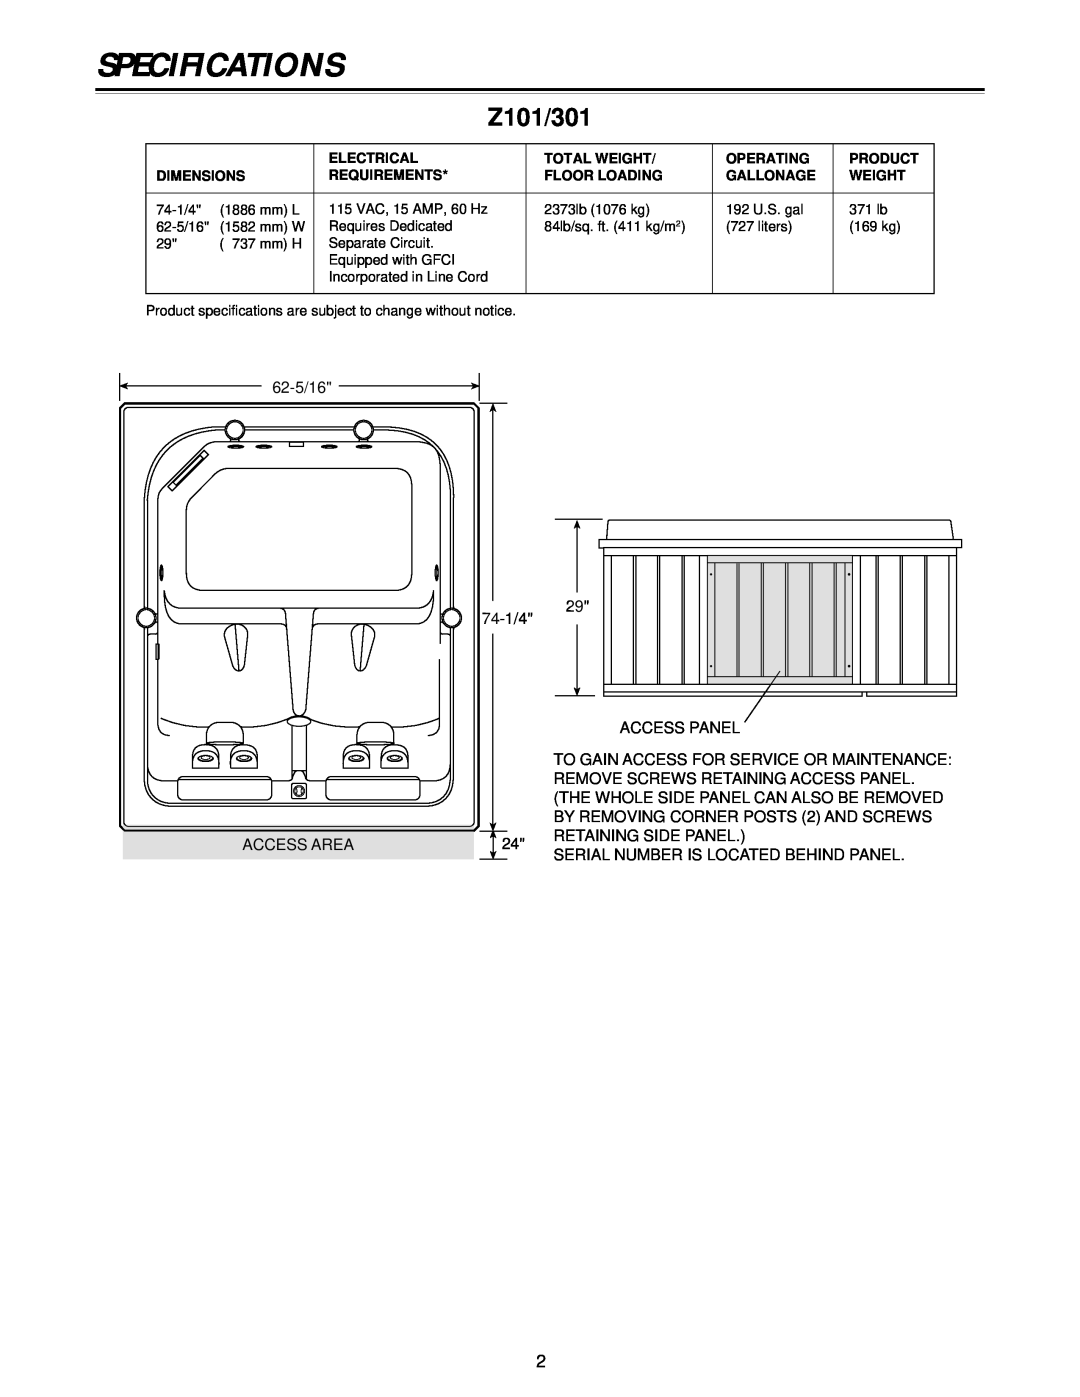 Jacuzzi owner manual Specifications, Z101/301 